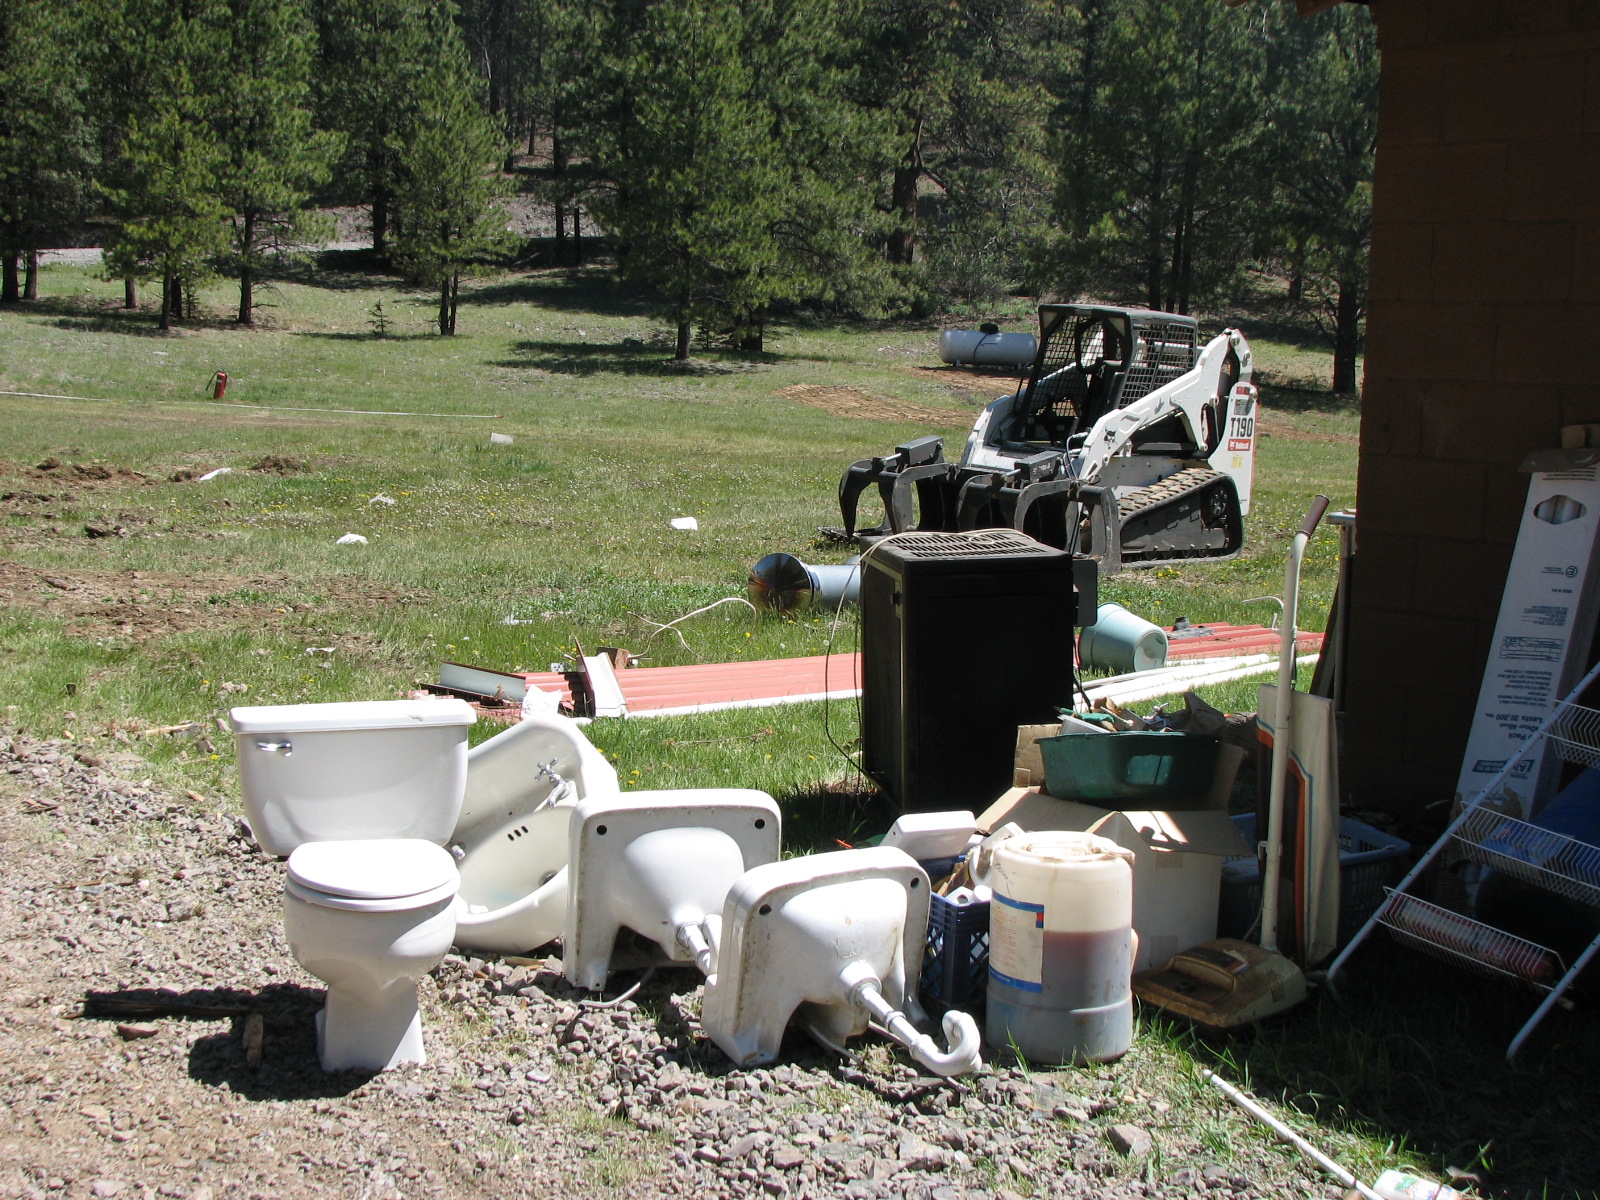 Out with the old, broken toilets & sinks